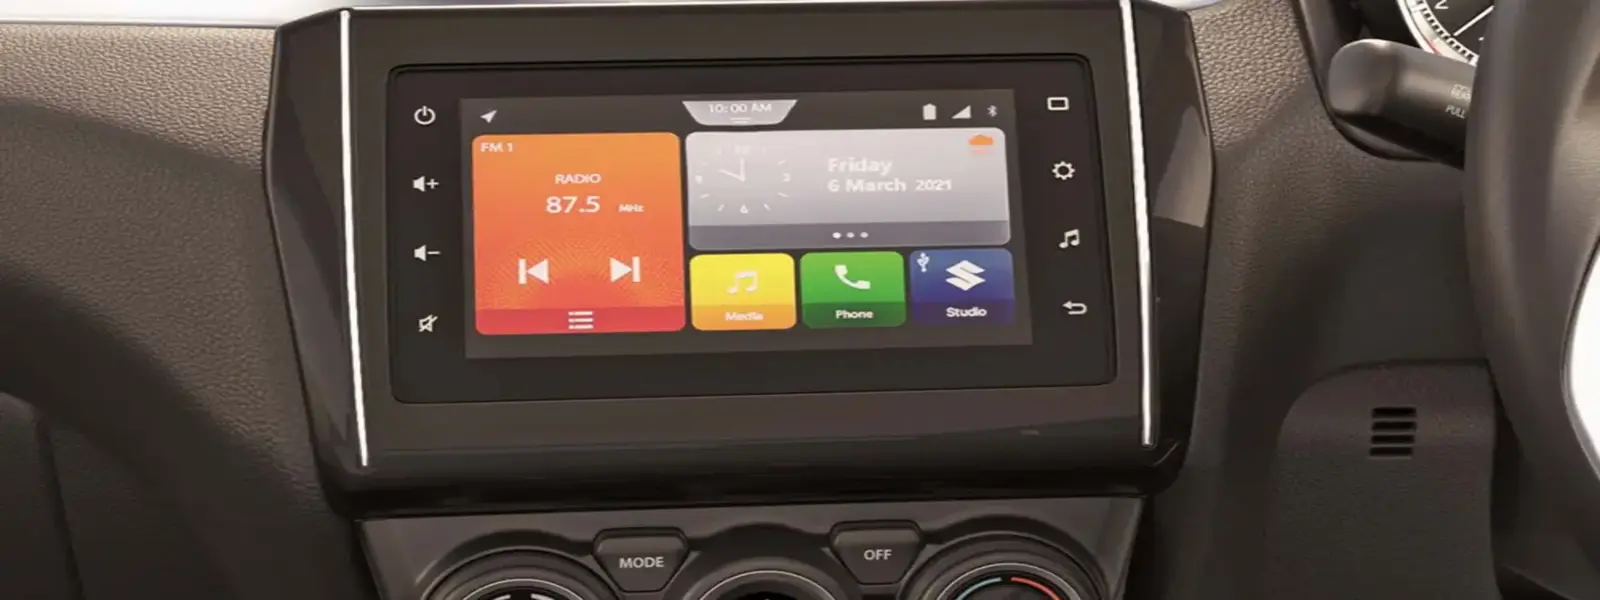 Swift- SmartPlay Infotainment System Autopace Network Industrial Area Phase 1, Chandigarh